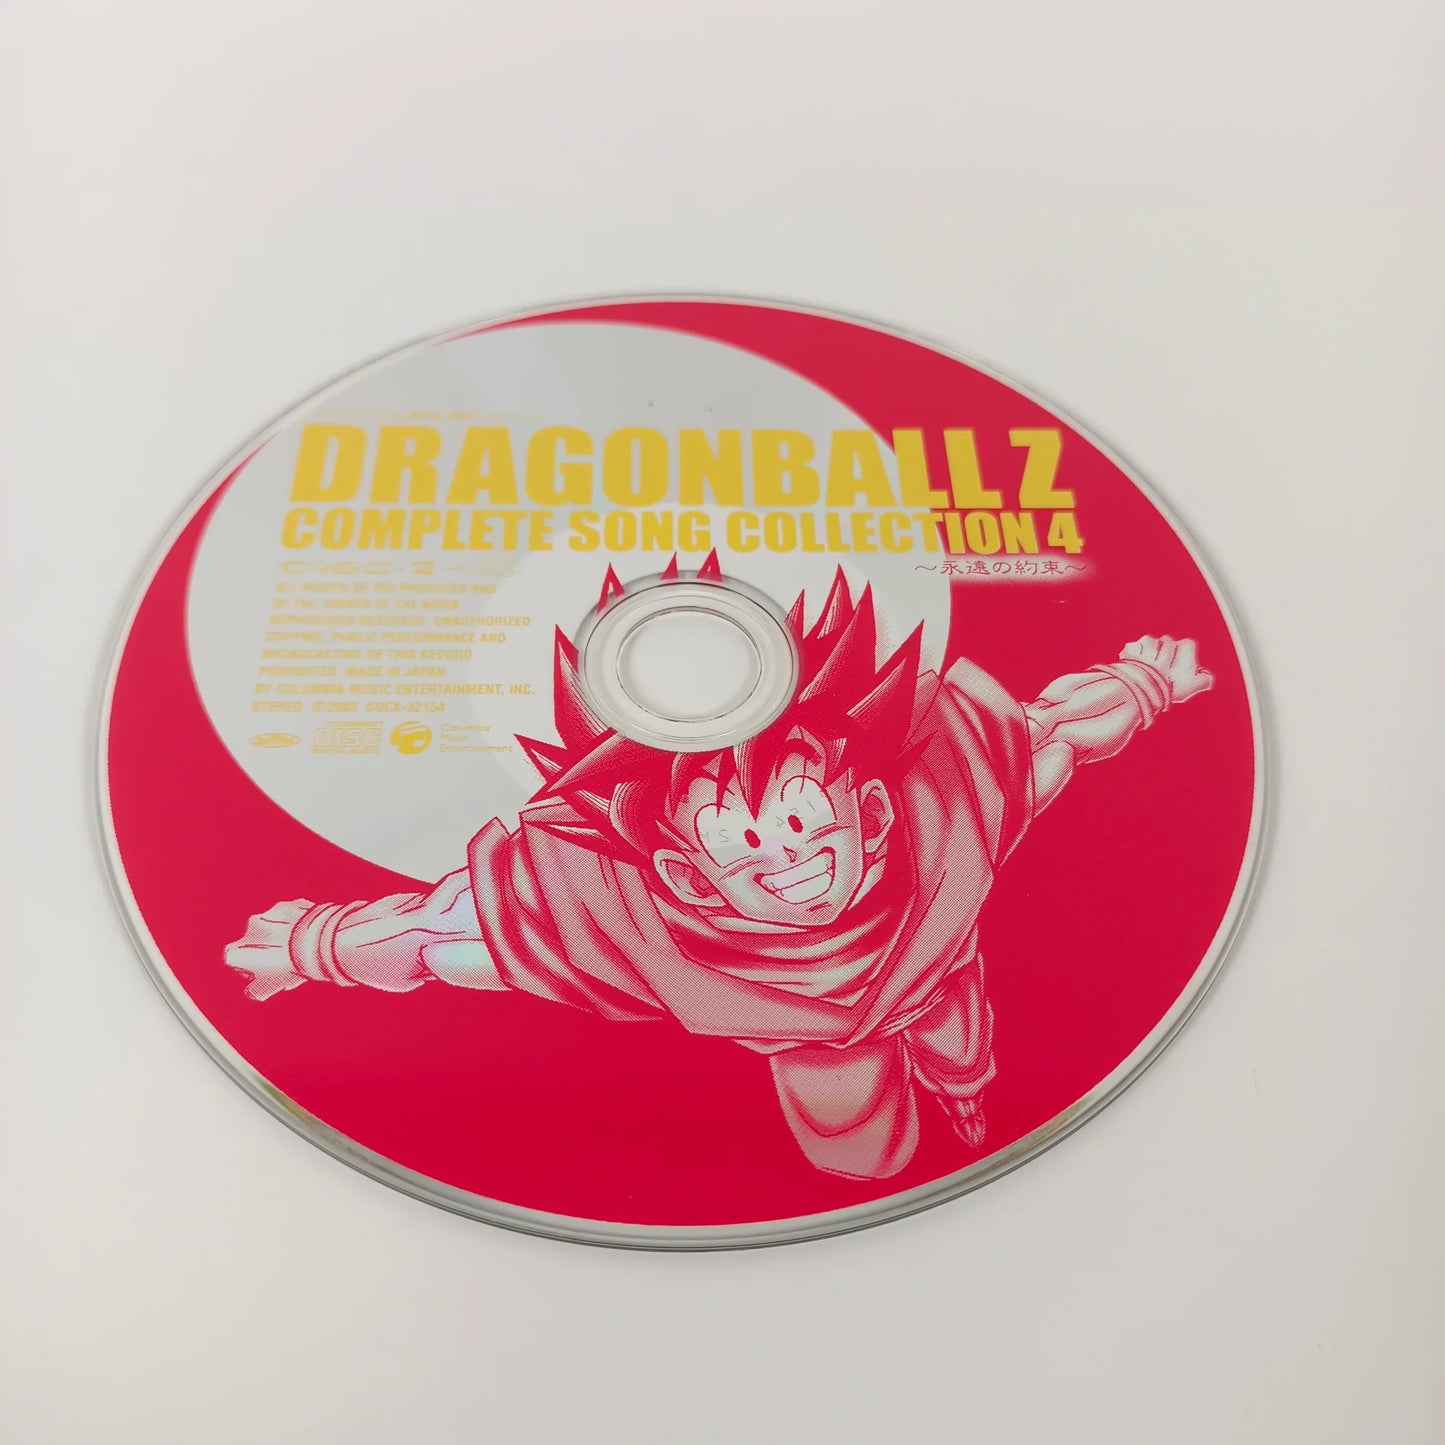 Dragon Ball Z Complete Song Collection Volume 4